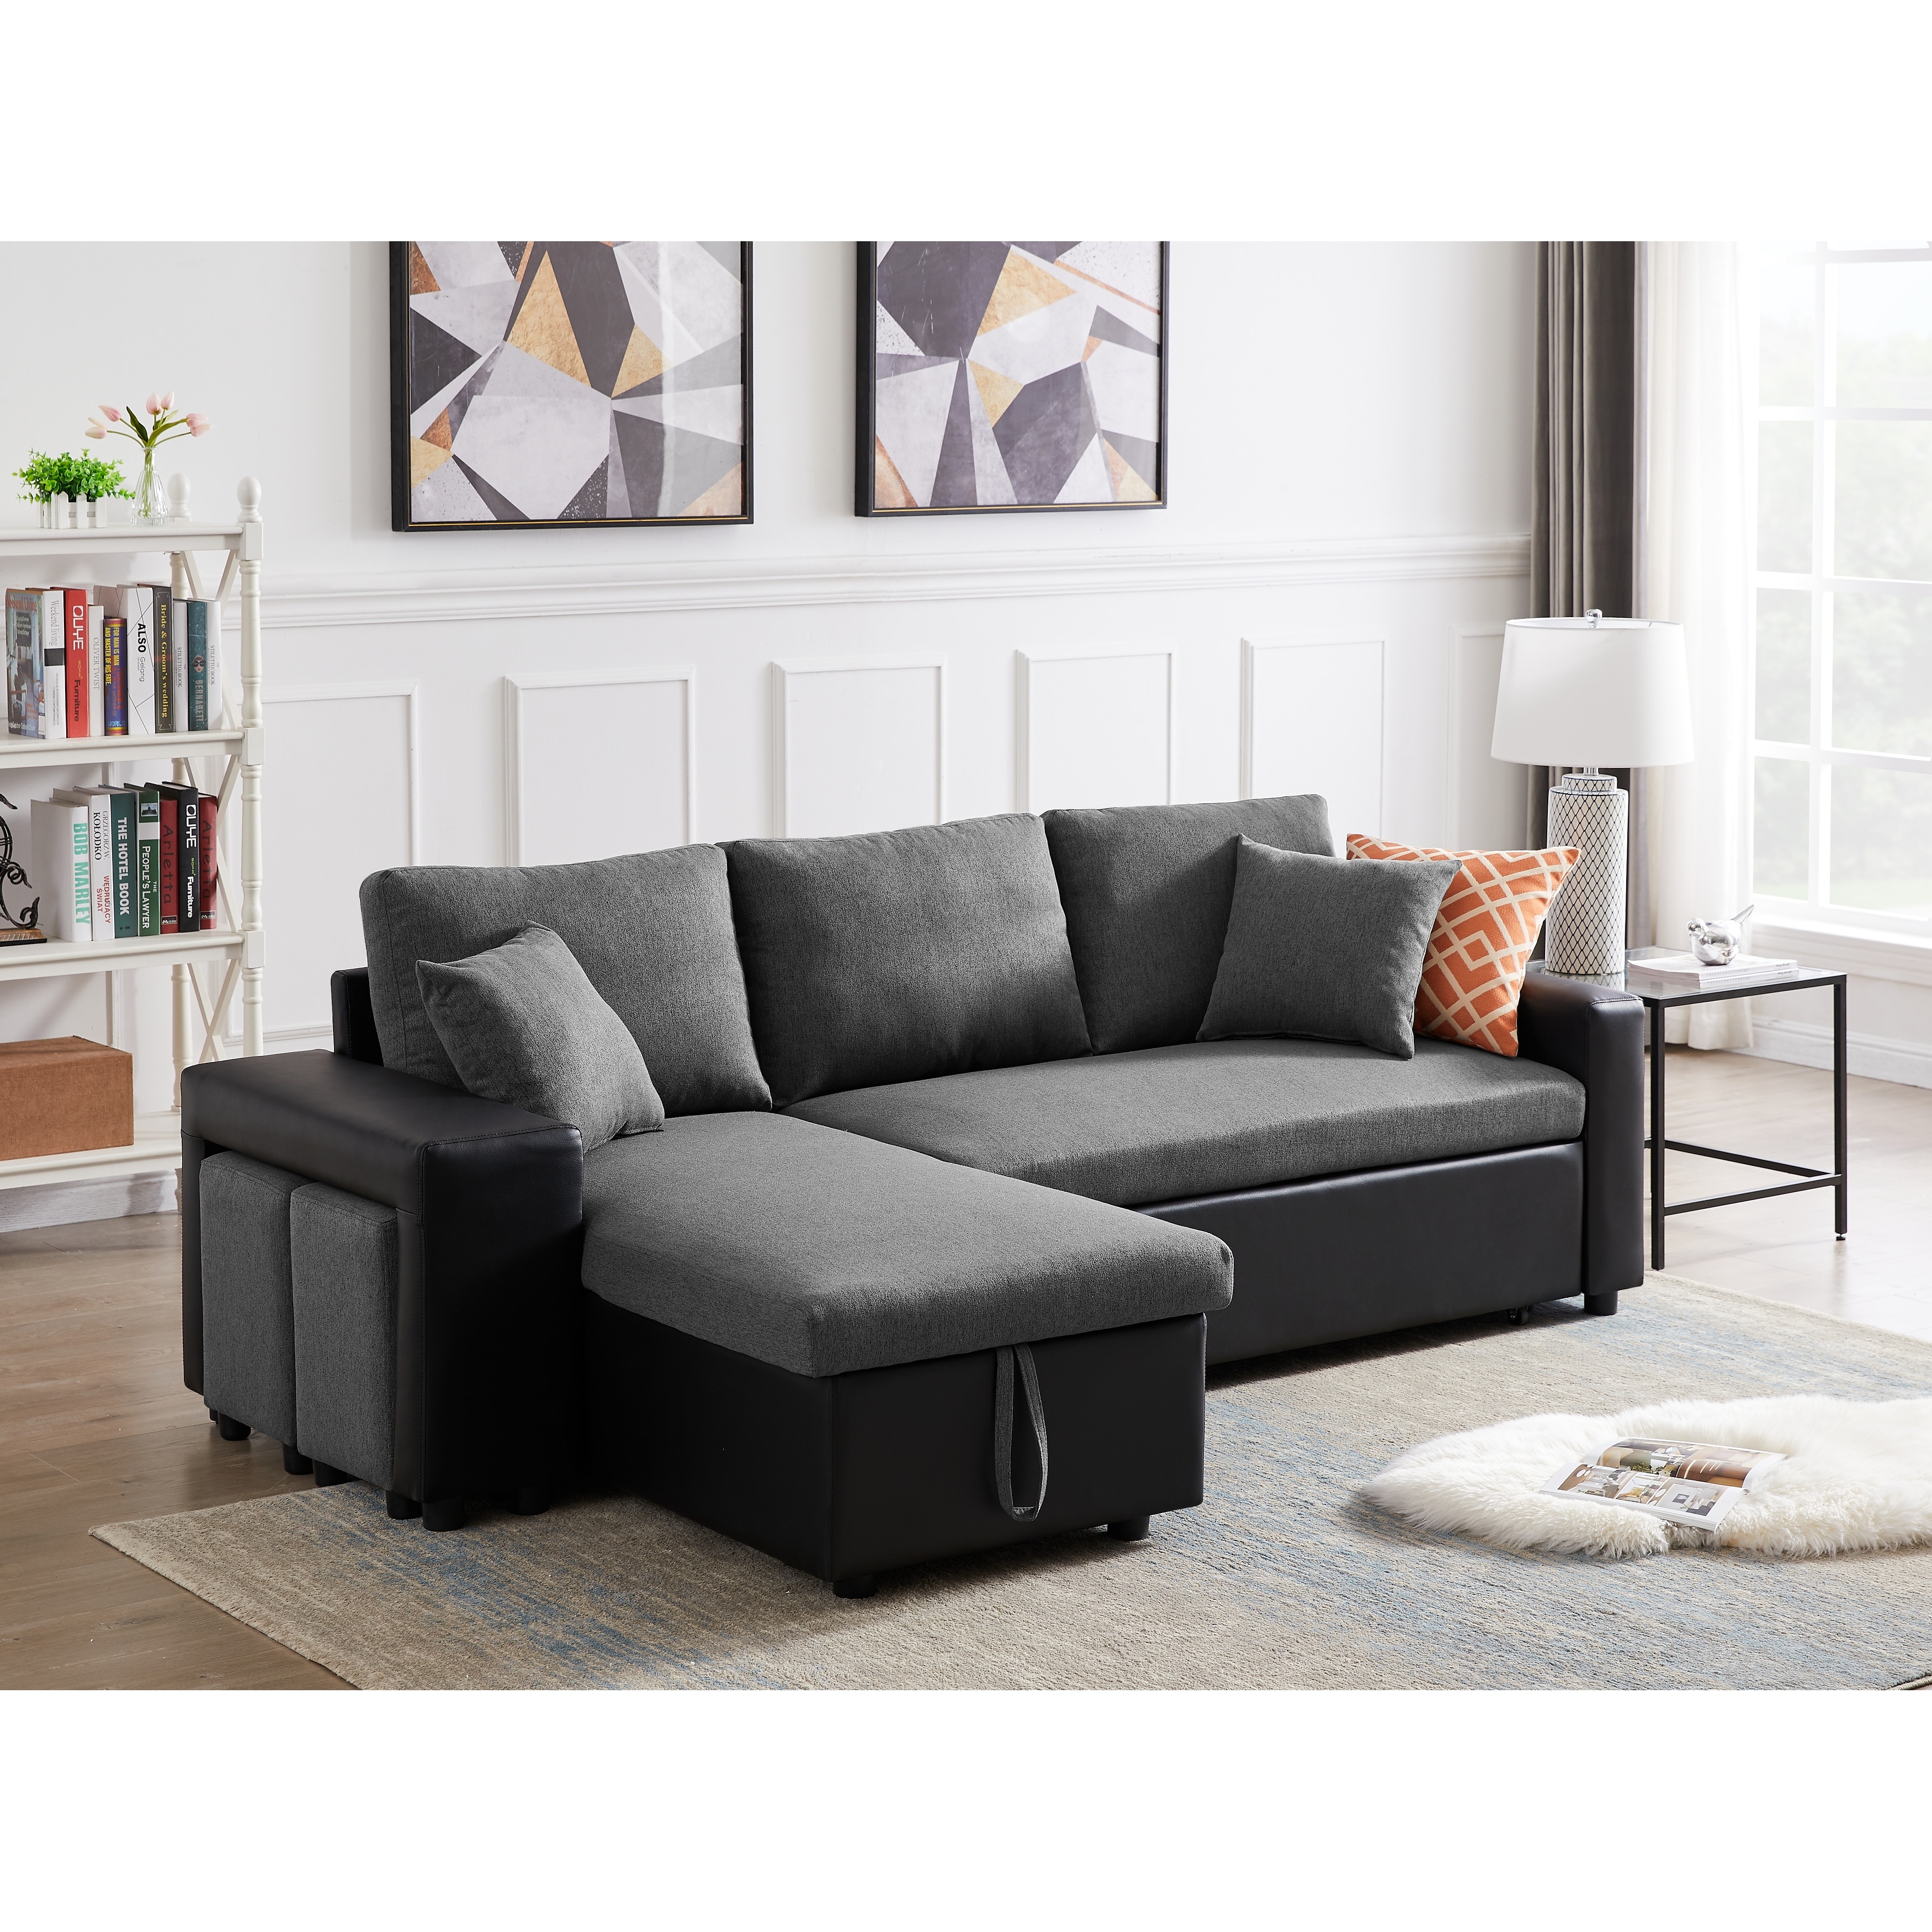 Pu And Fabric Cover Reversible Chaise Sleeper Sectional Sofa With Storage And 2 Stools